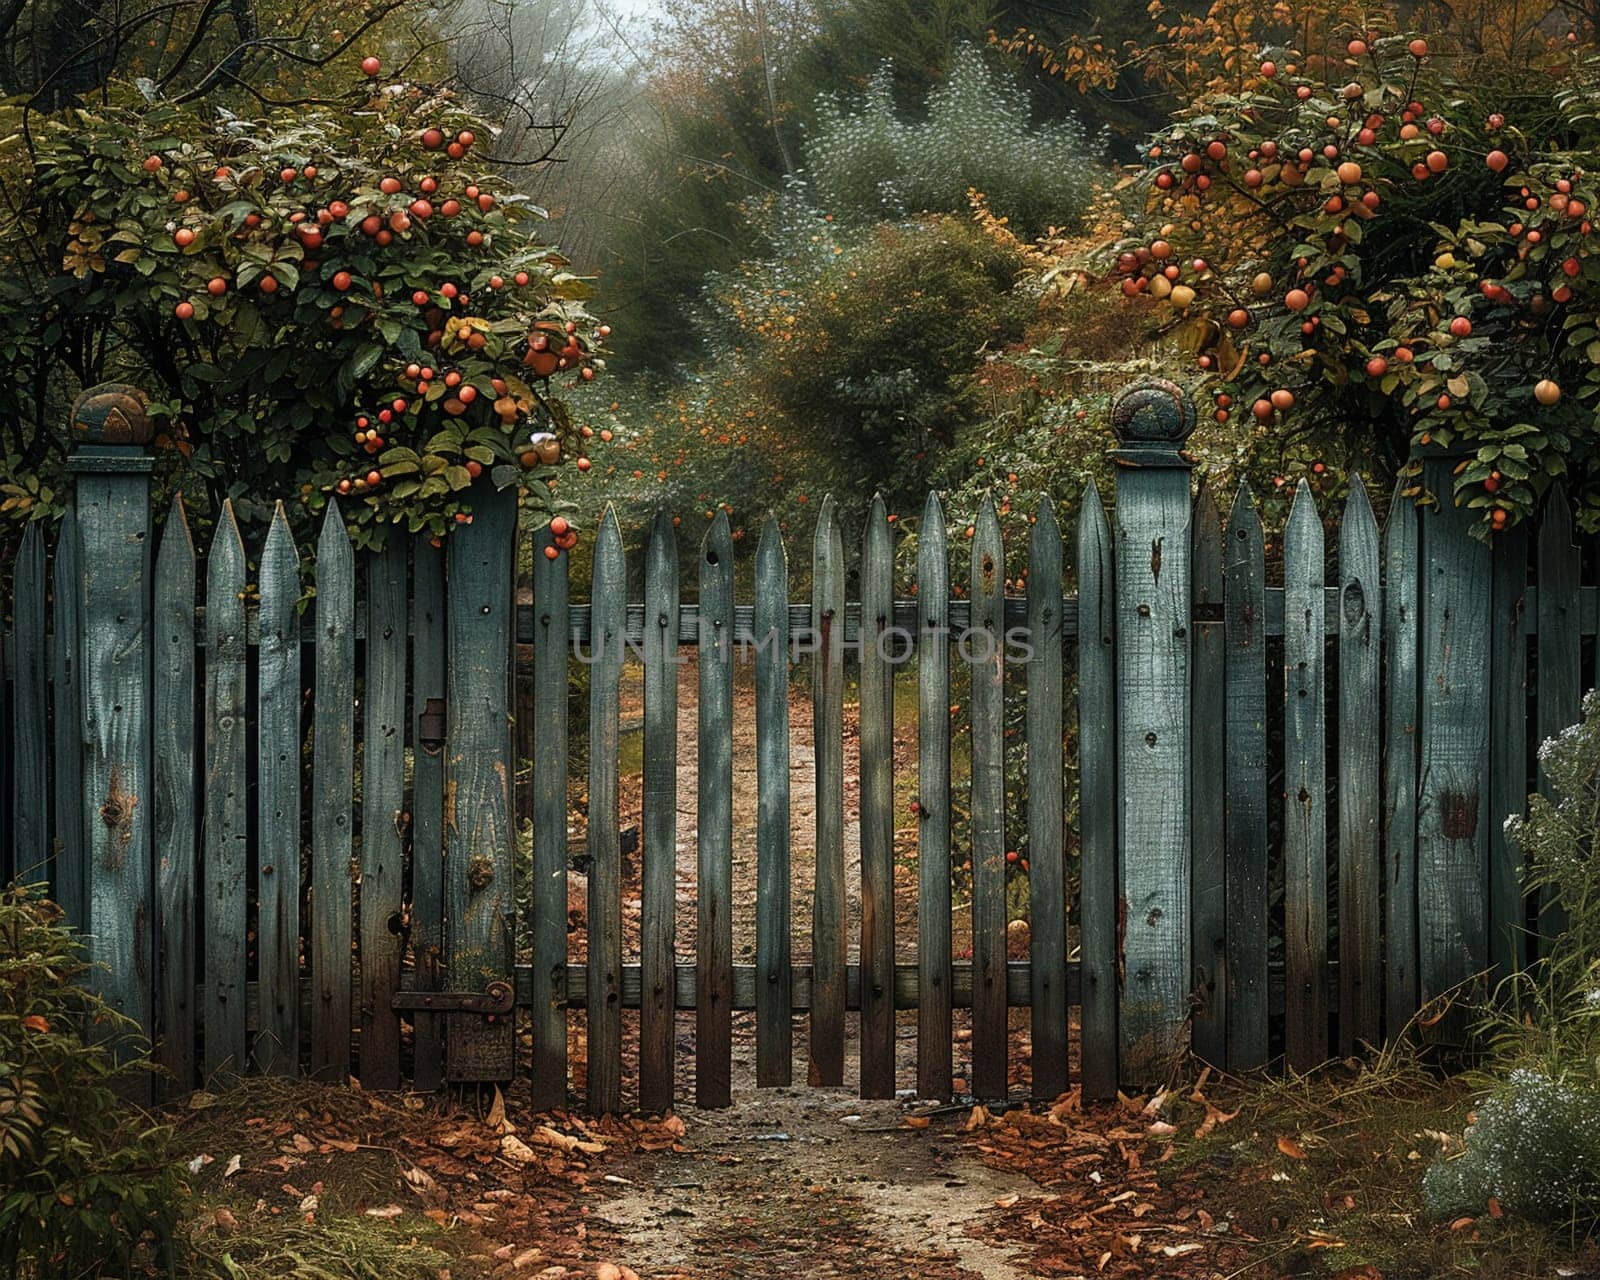 A rustic gate leading into a secret garden, inviting mystery and discovery.